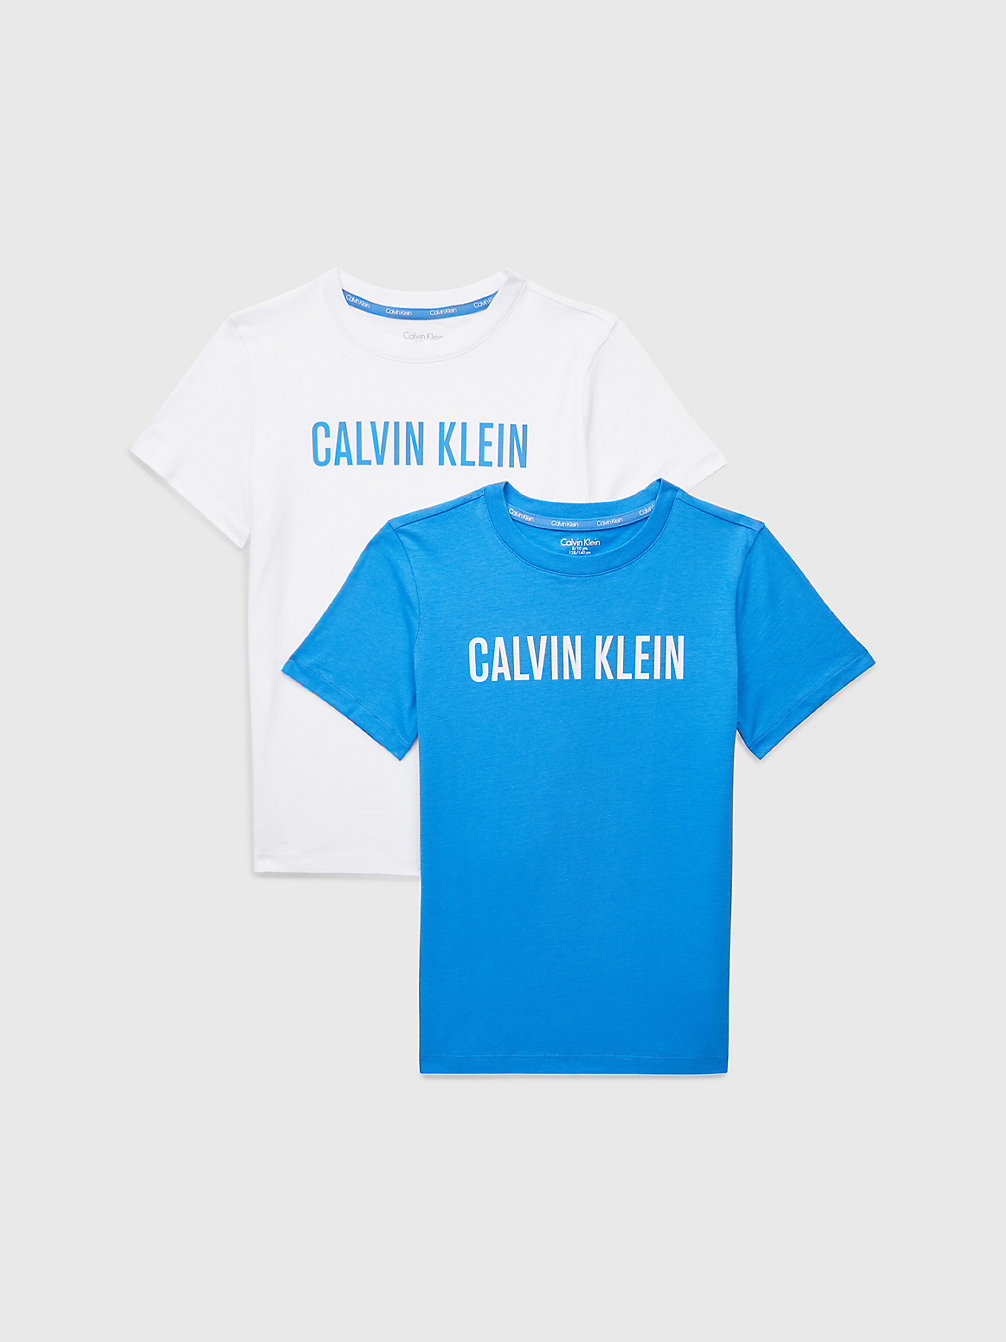 ELECTRICAQUA/PVHWHITE 2 Pack Boys T-Shirts - Intense Power undefined boys Calvin Klein